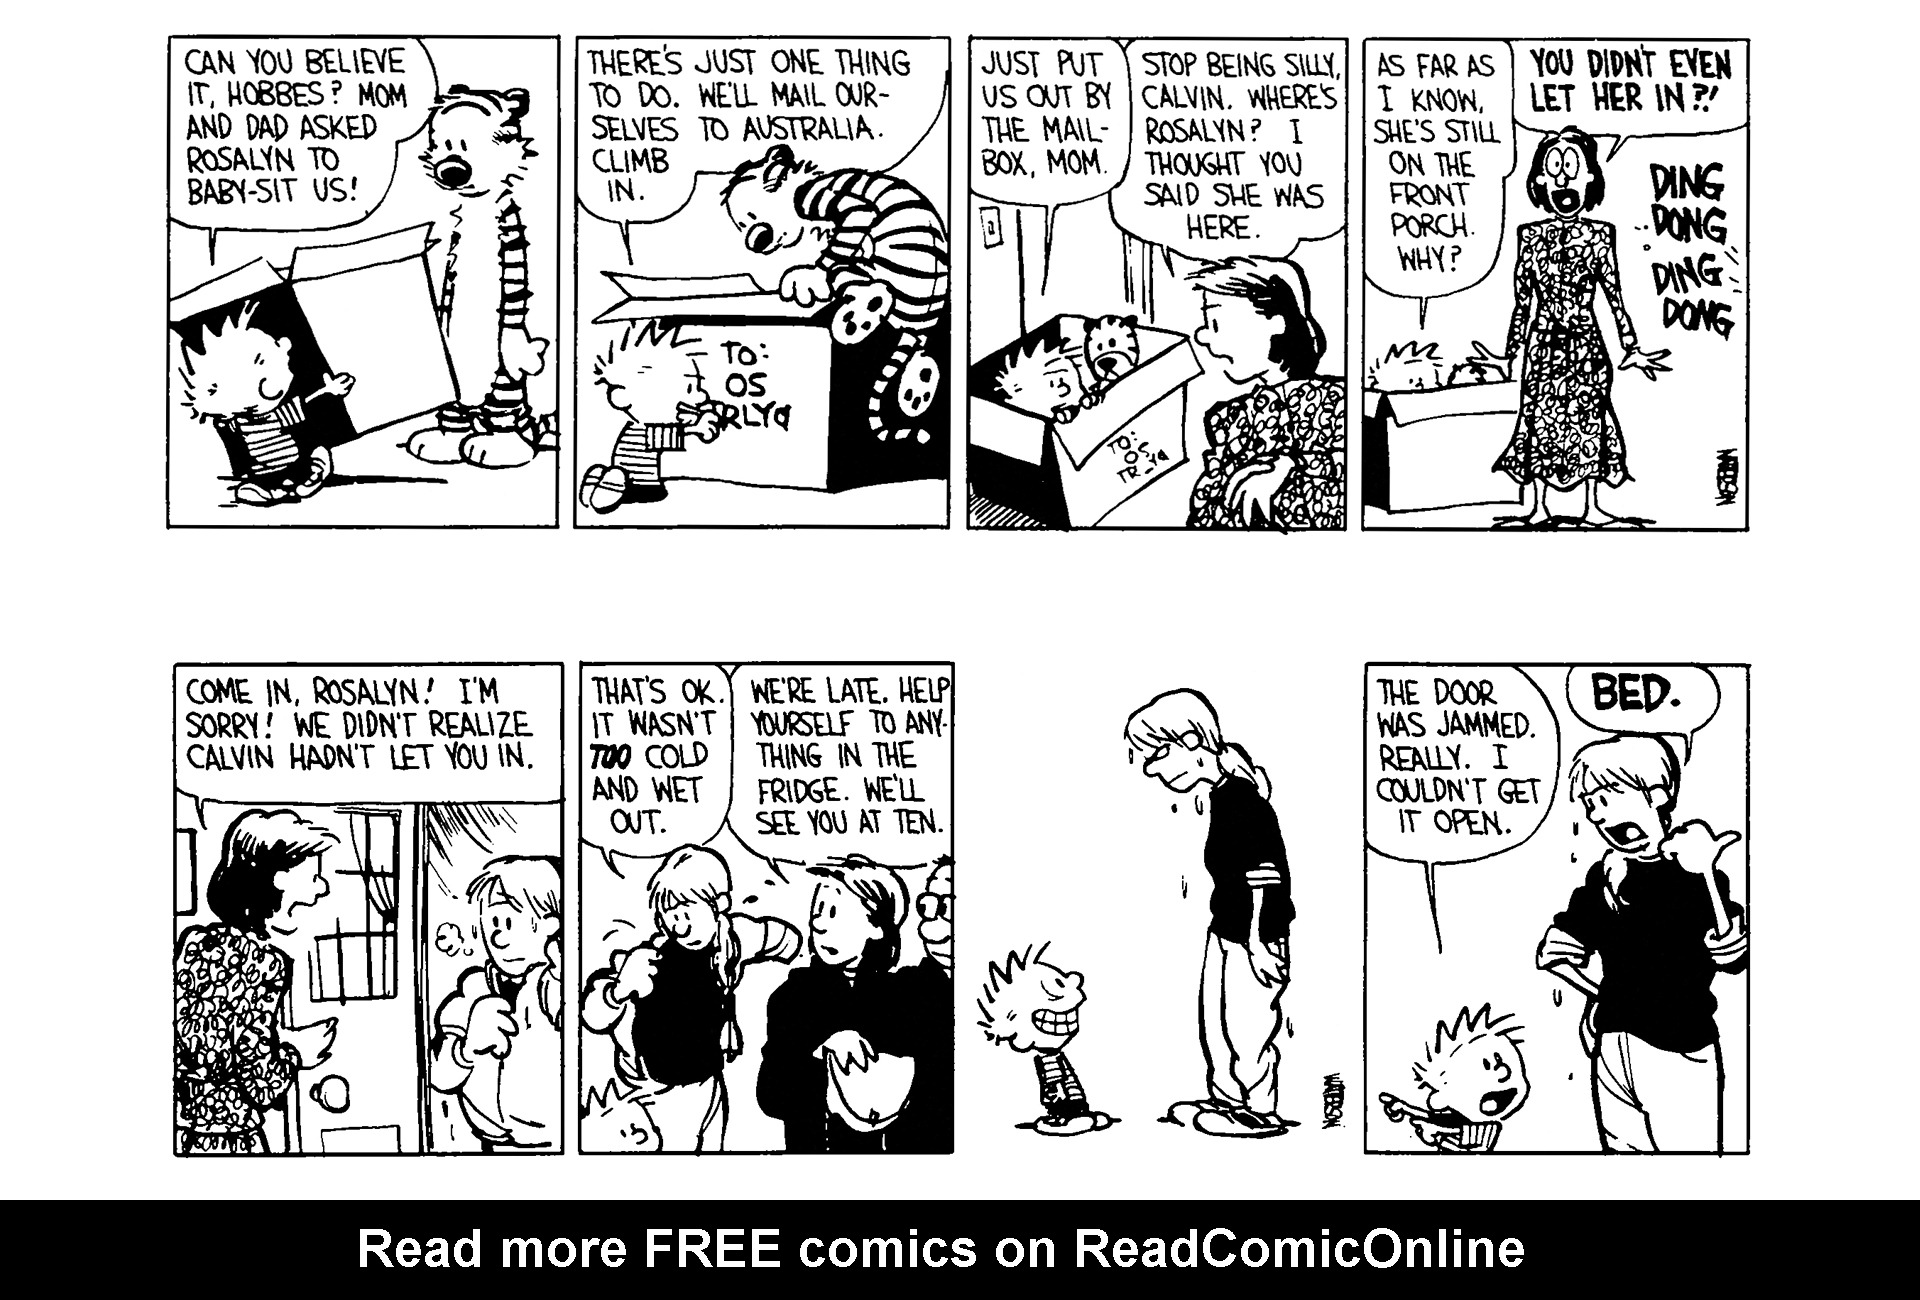 Calvin and Hobbes Issue 4 | Viewcomic reading comics online ...